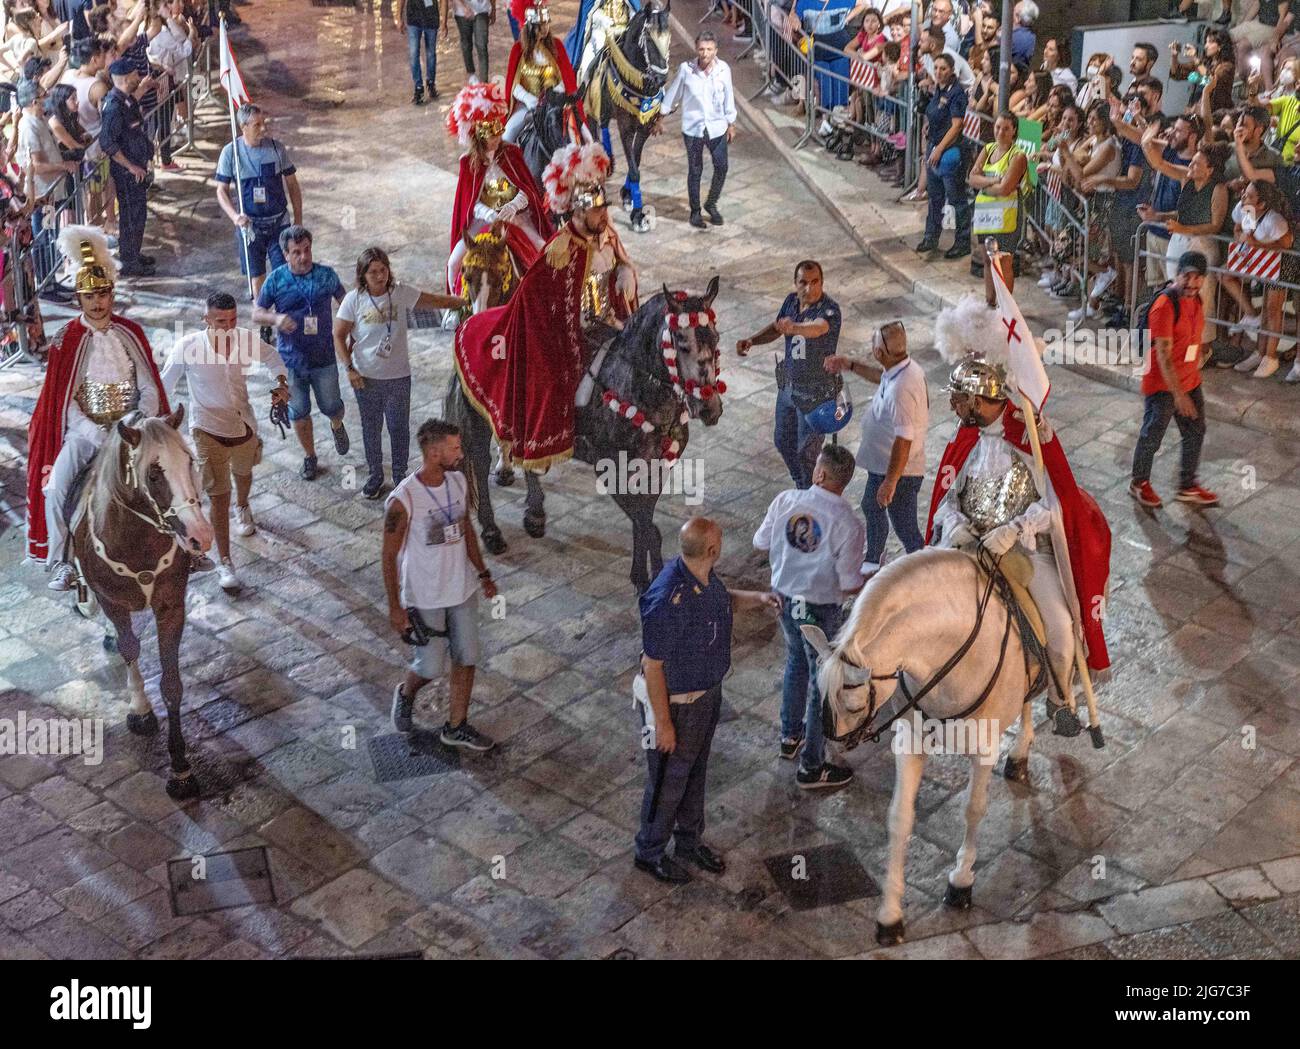 Procession for the celebration of the festival of the Brown Madonna of Matera with men on horseback in traditional garb leading the festivities Stock Photo